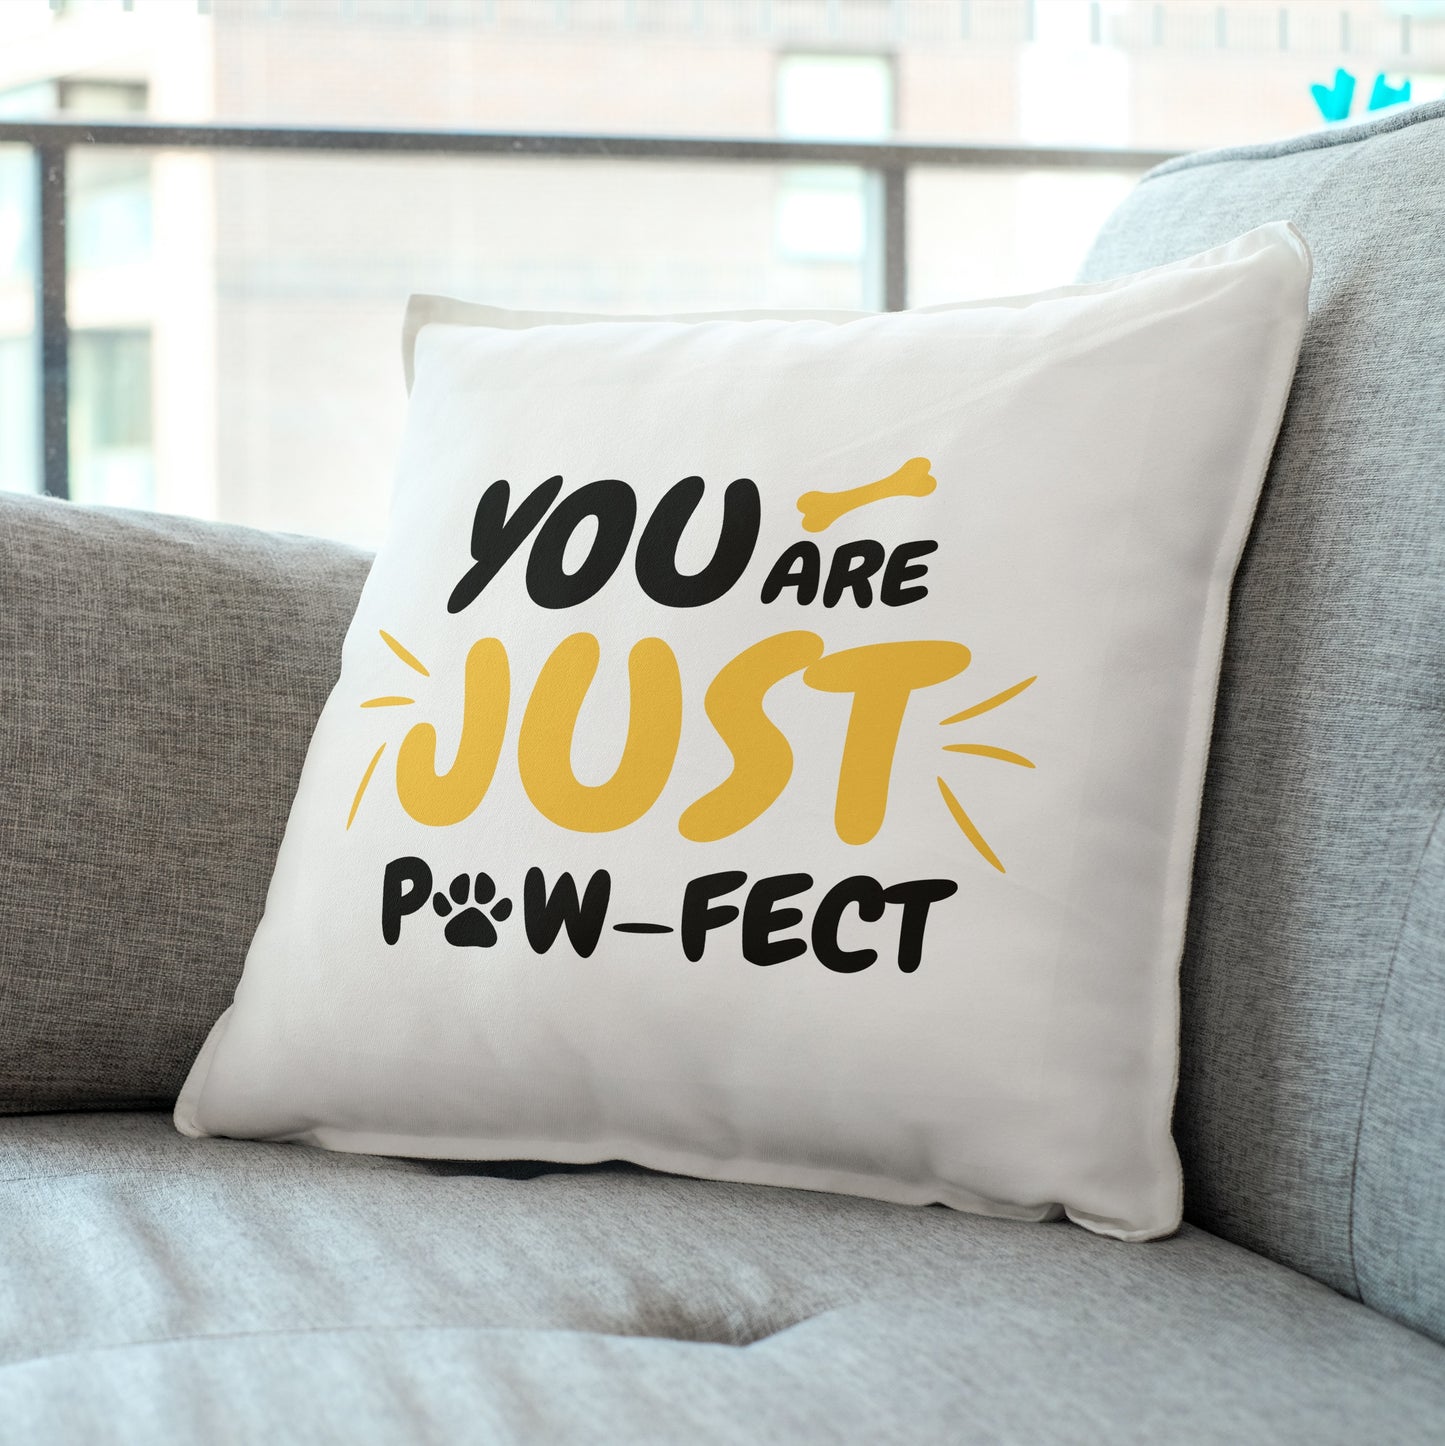 Pawfect Cushion Cover (Cover & Cushion Both Included)